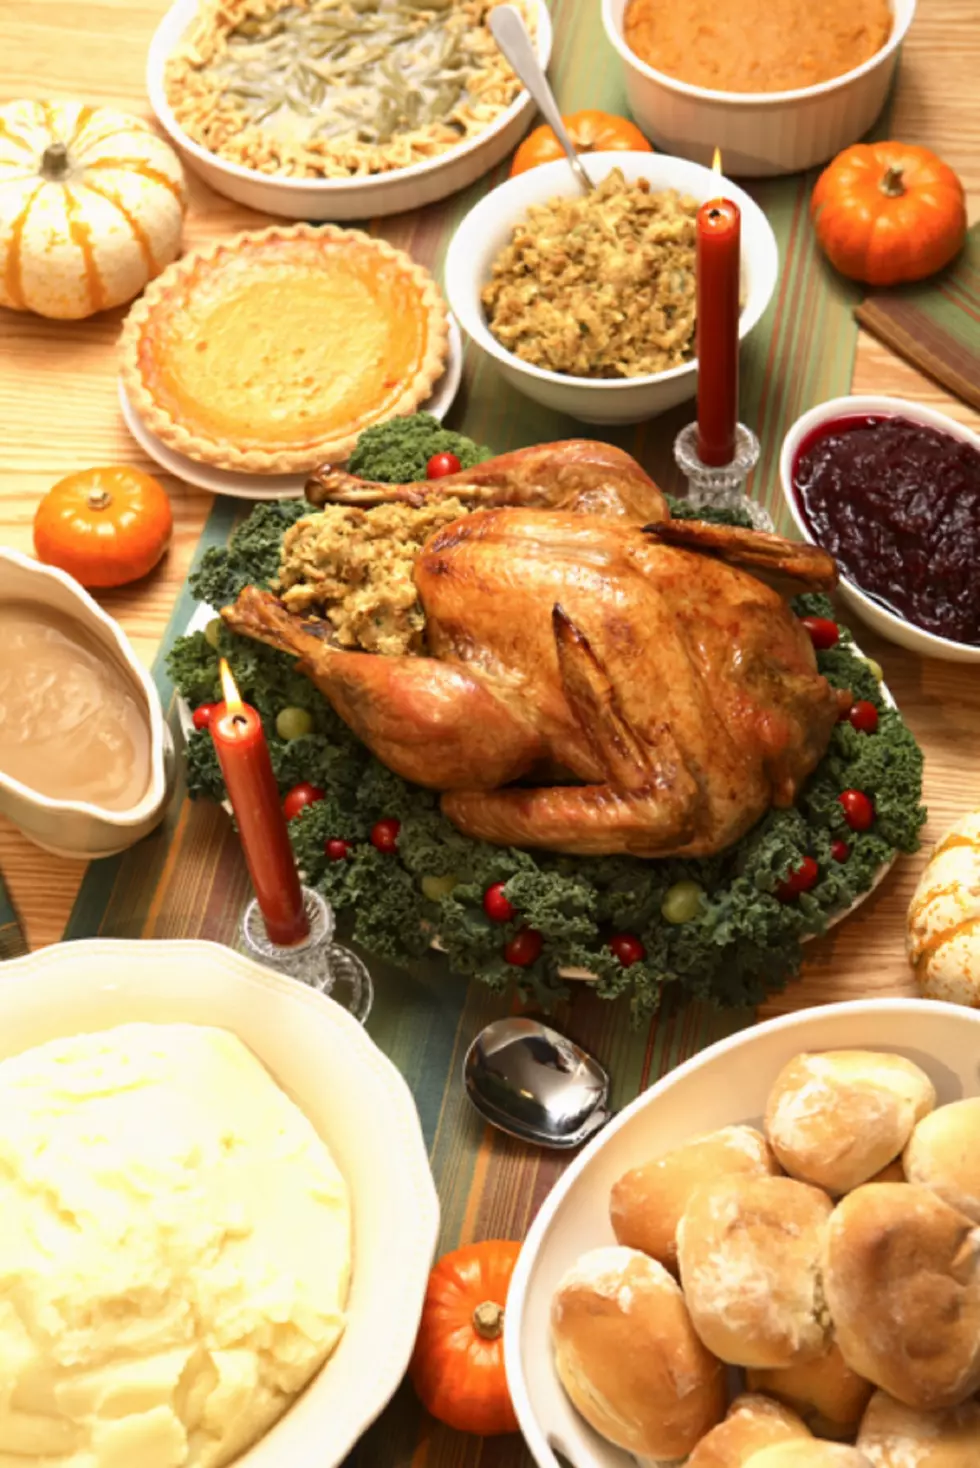 Rome Rescue Mission Is Asking For Your Help With Thanksgiving 2020